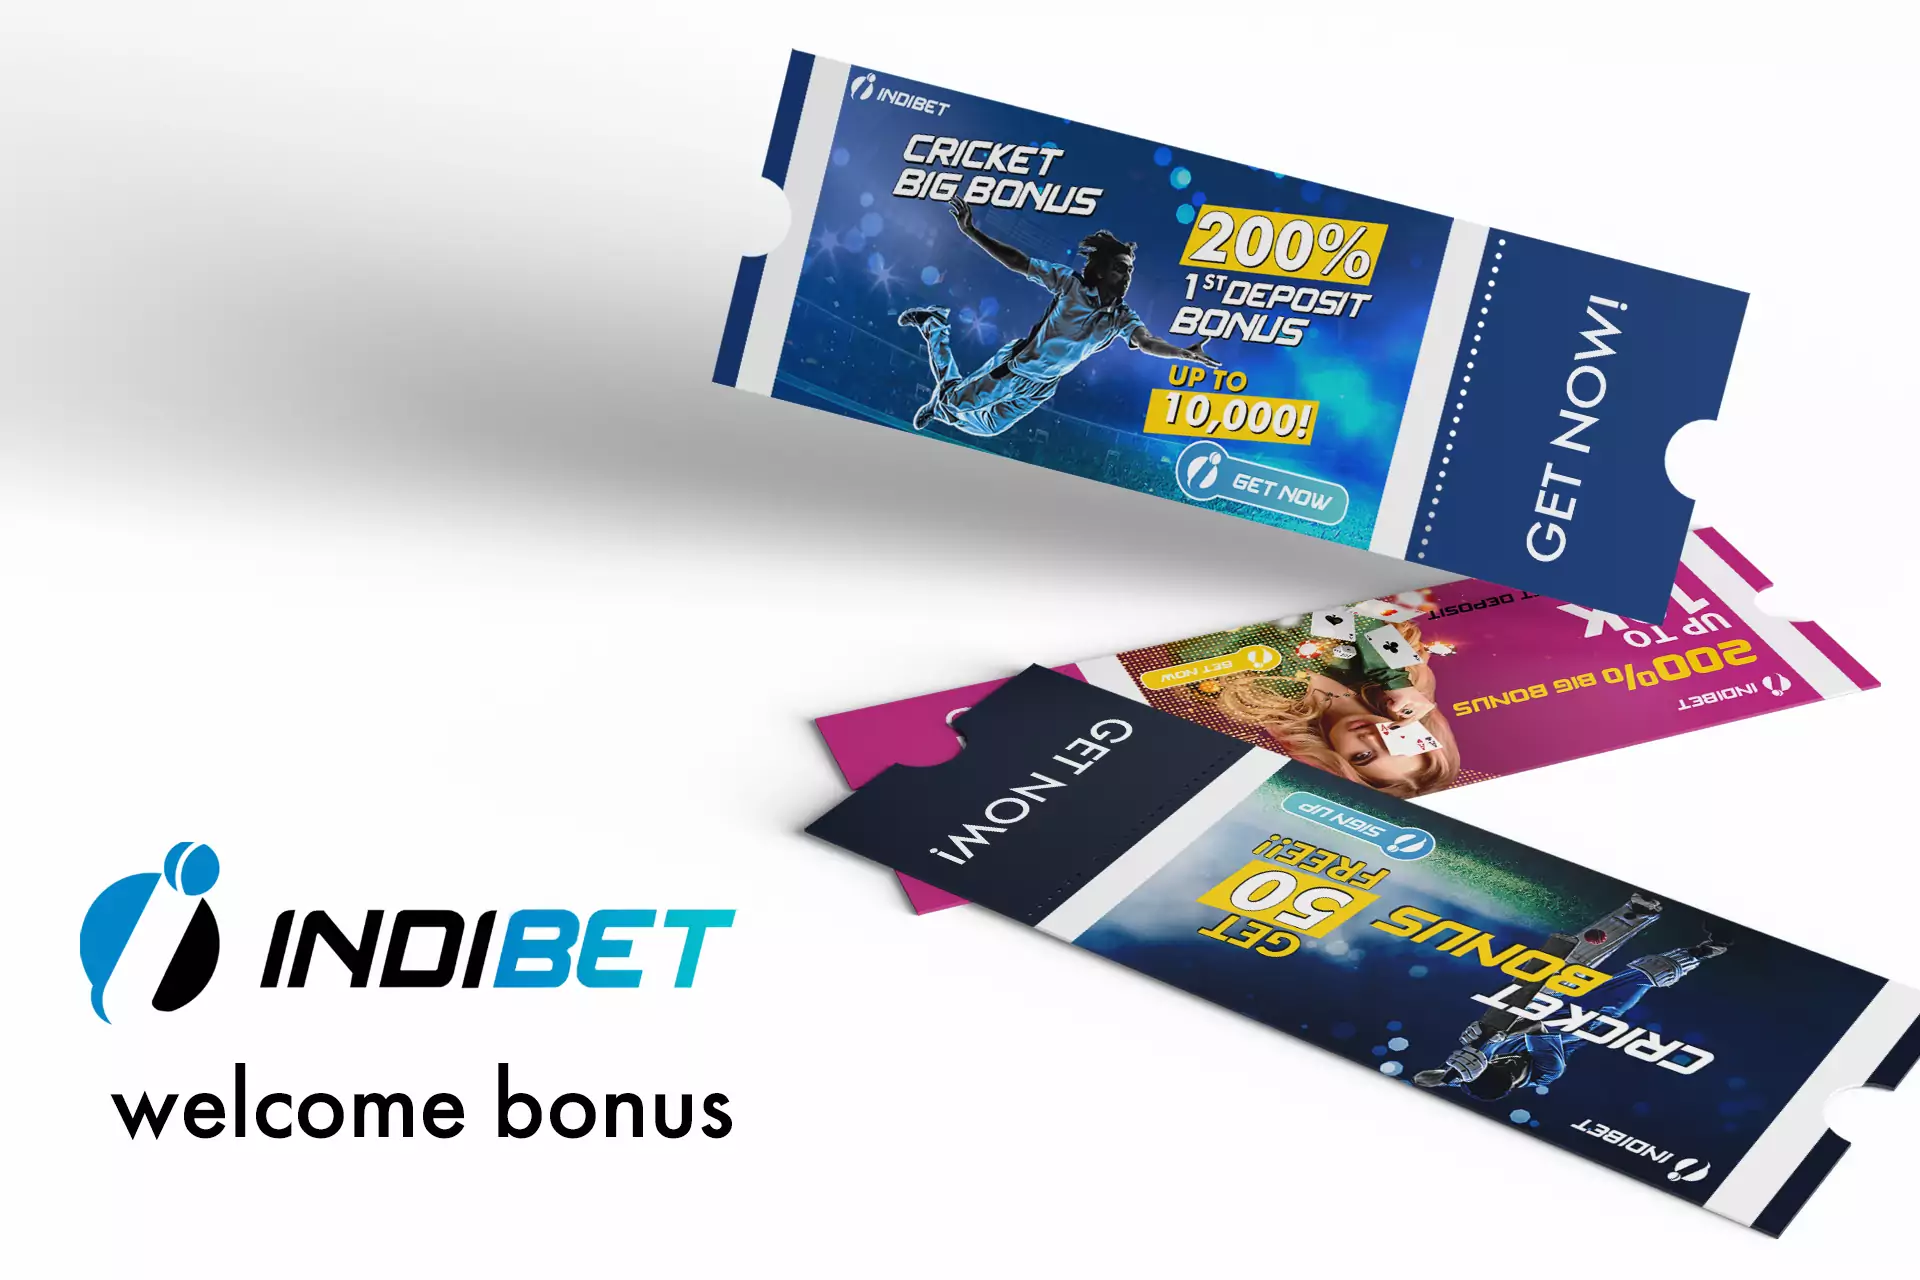 On Indibet you find lots of options of bonus offers for new users.